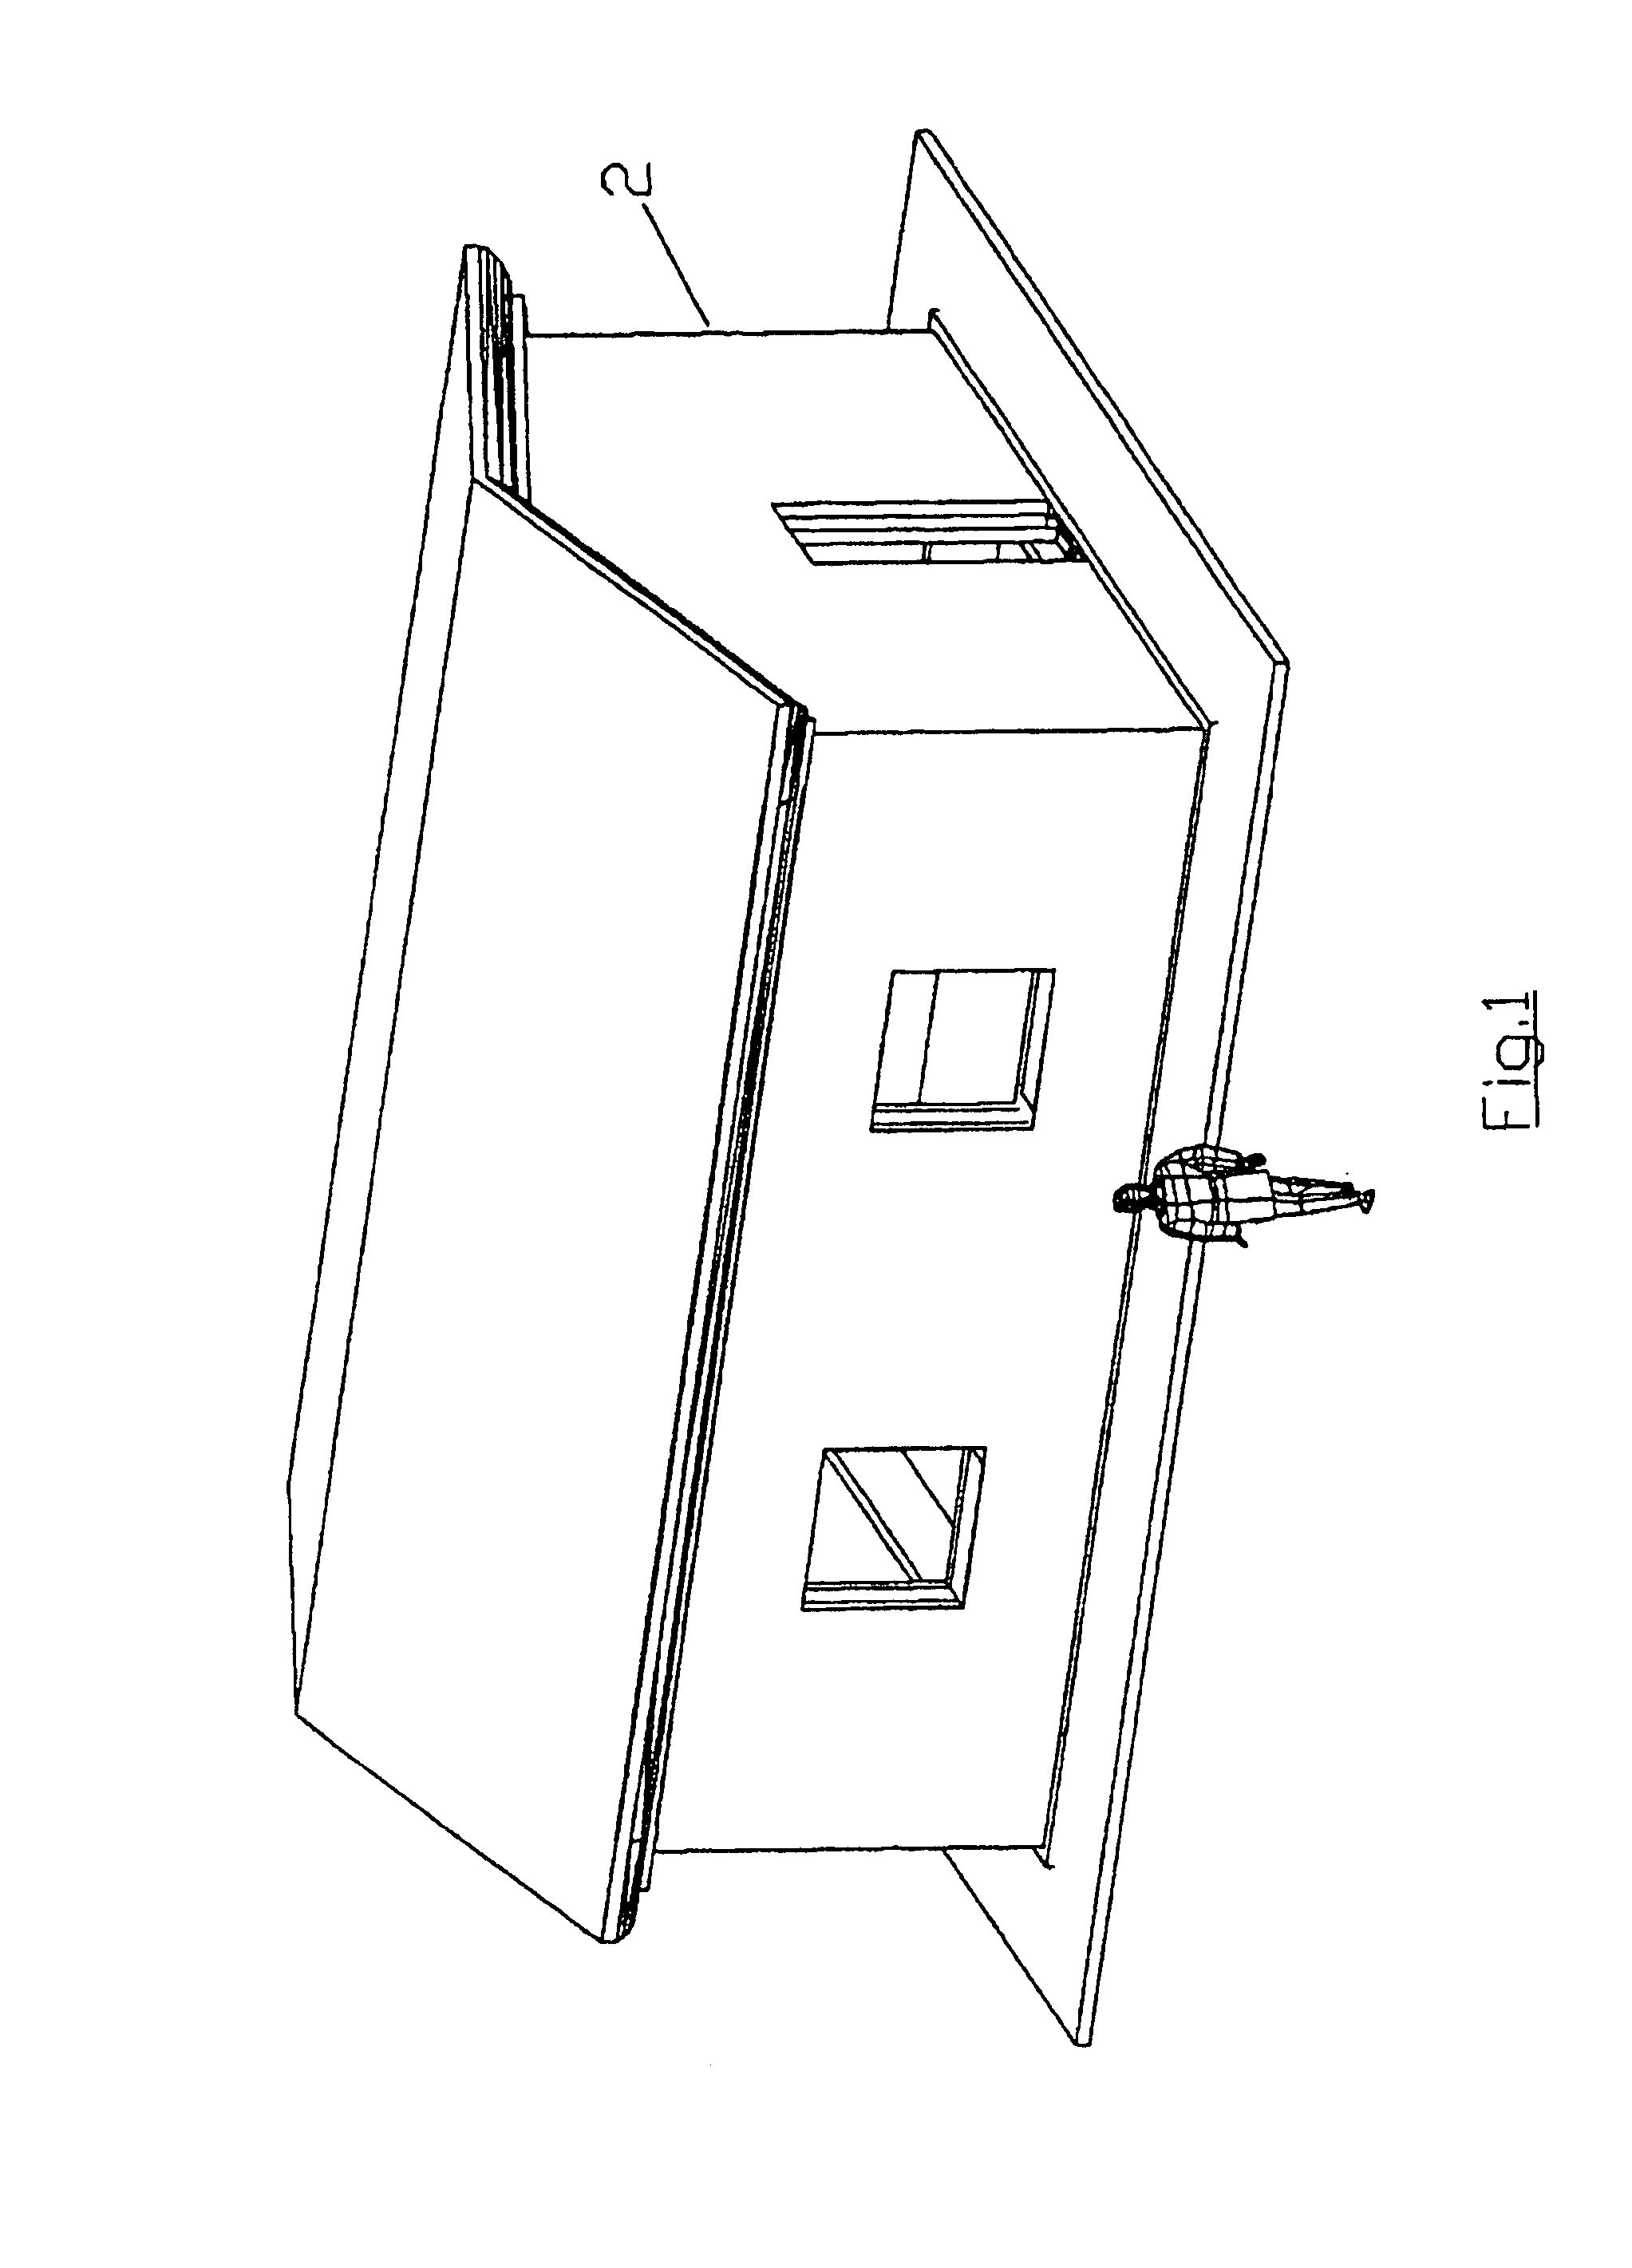 Method of manufacturing and analyzing a composite building